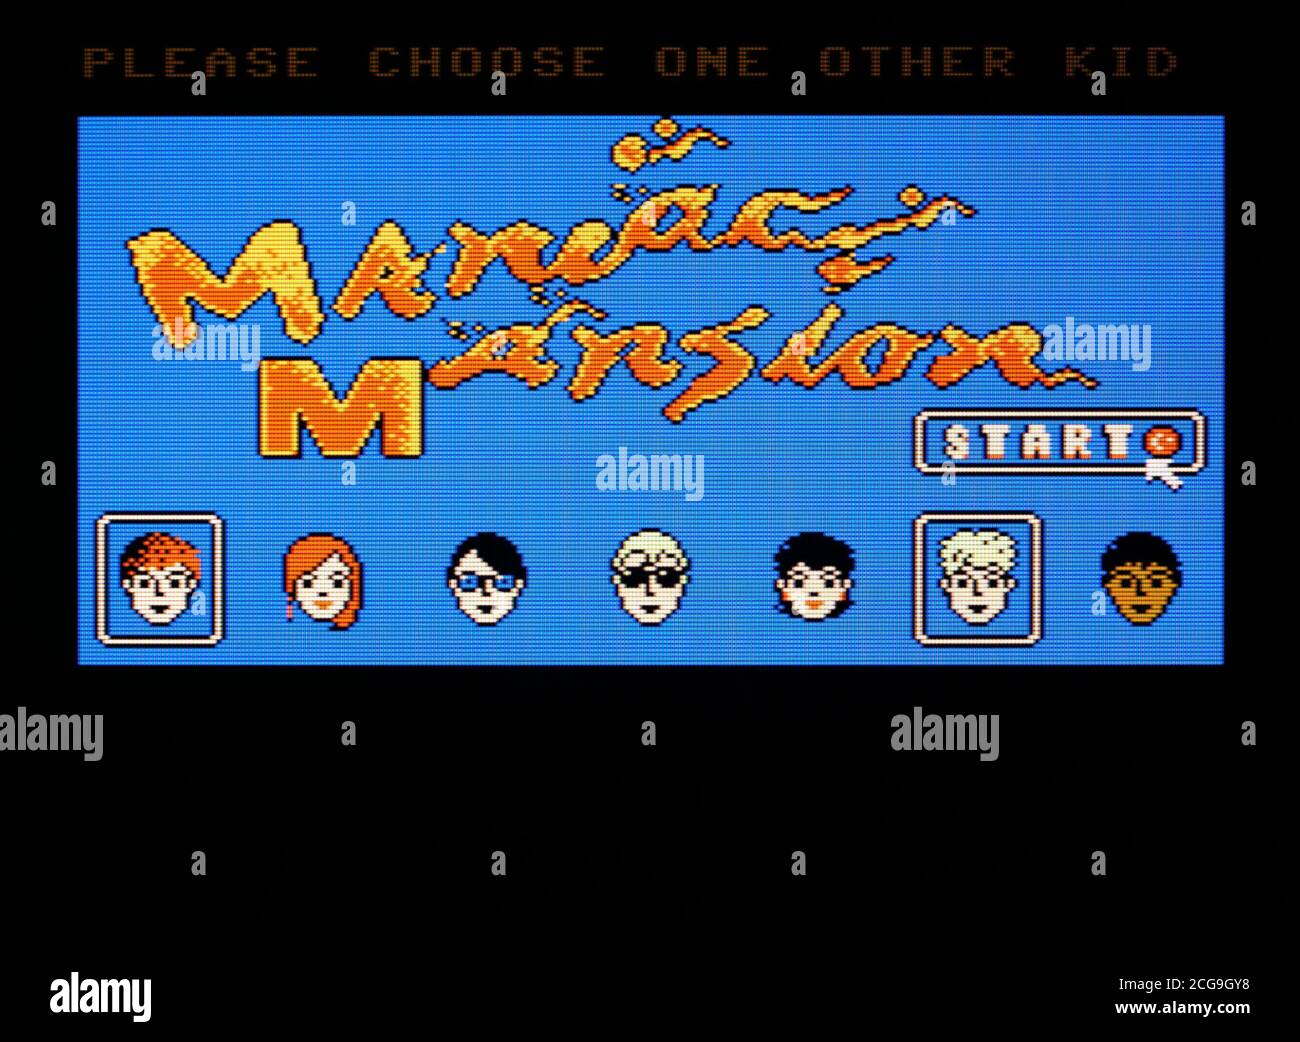 Maniac Mansion - Nintendo Entertainment System - NES Videogame - Editorial use only Stock Photo